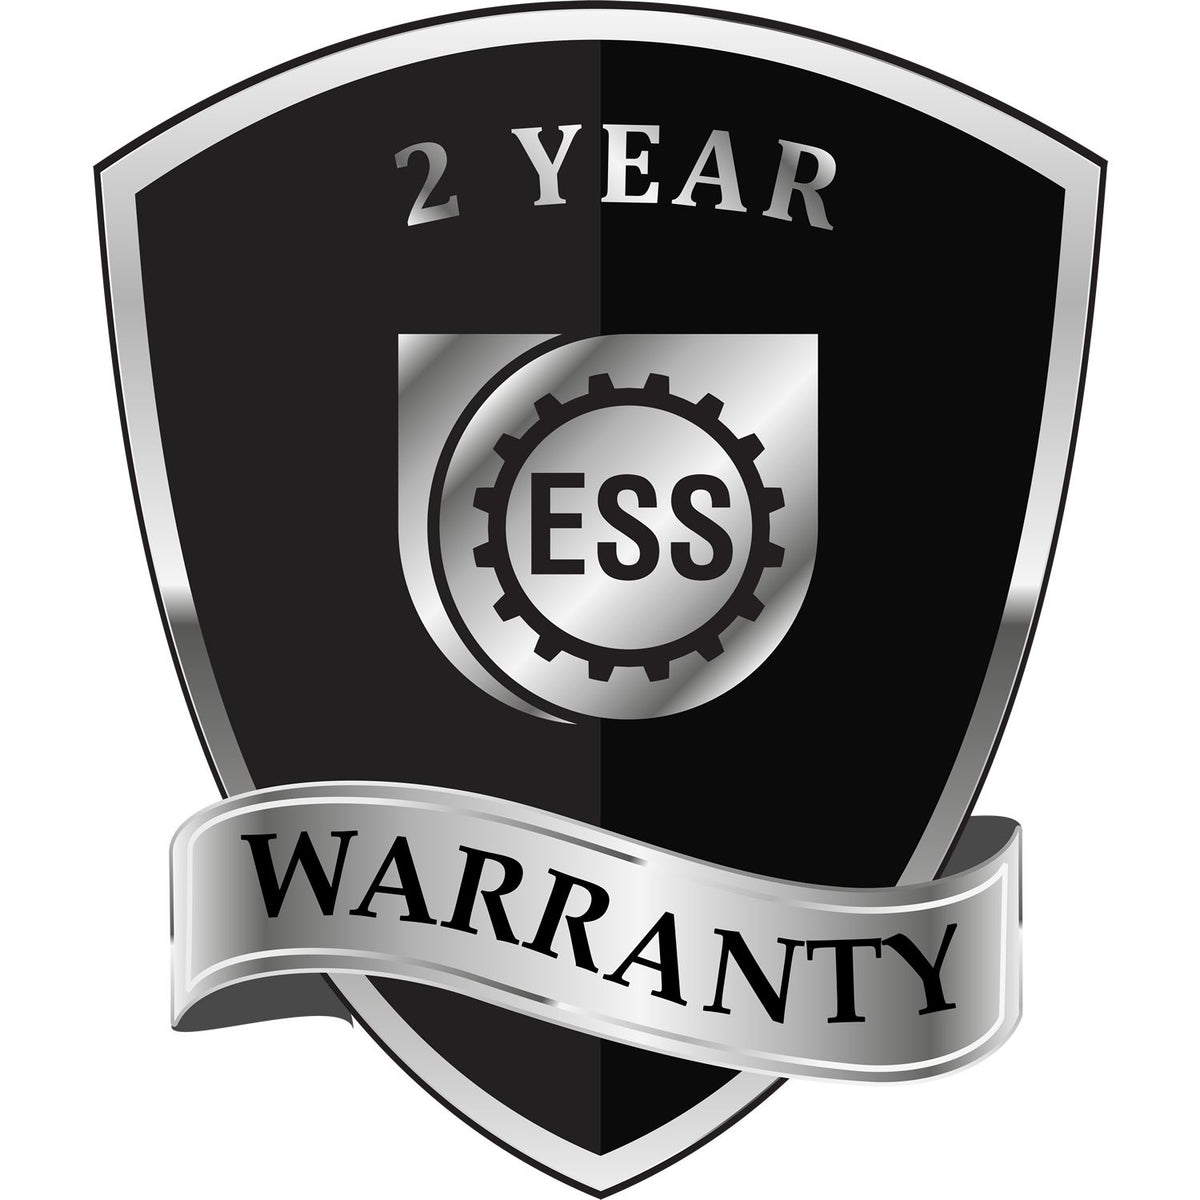 A badge or emblem showing a warranty icon for the Extended Long Reach Colorado Architect Seal Embosser